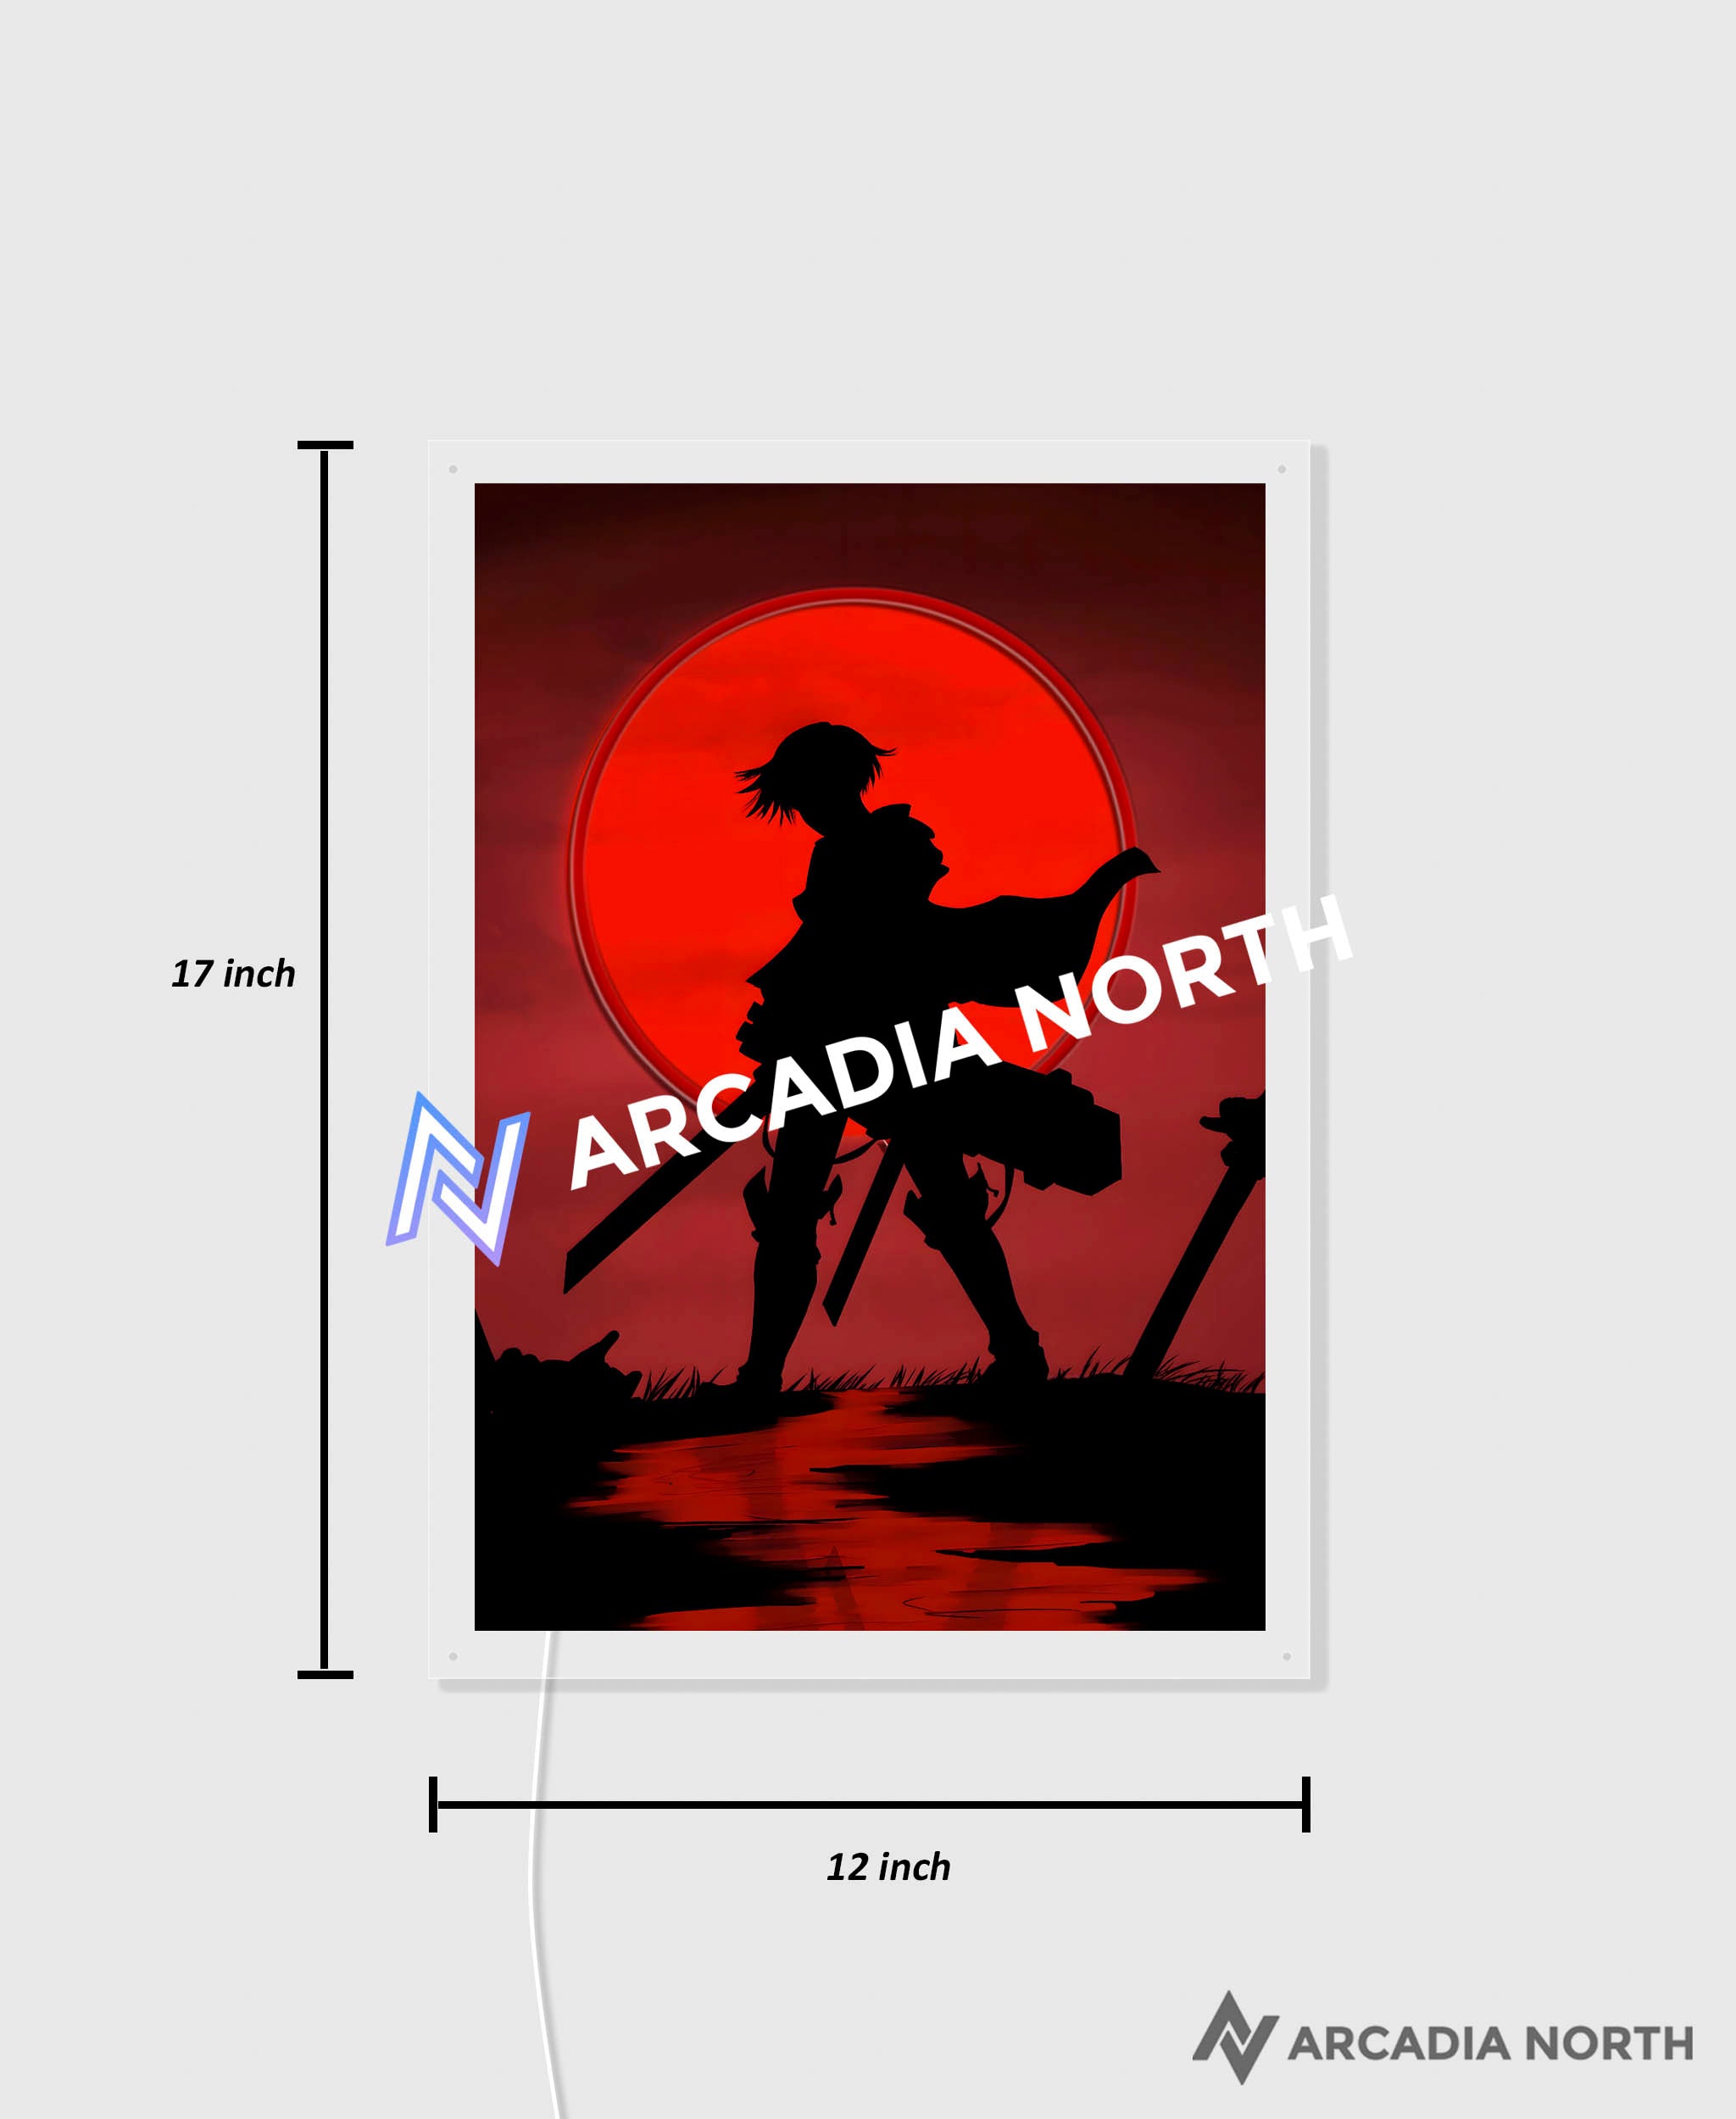 Arcadia North AURALIGHT Original LED Poster featuring the anime Attack on Titan with Levi Ackerman standing in front of a red moon illuminated by glowing neon LED lights. UV-printed on acrylic.